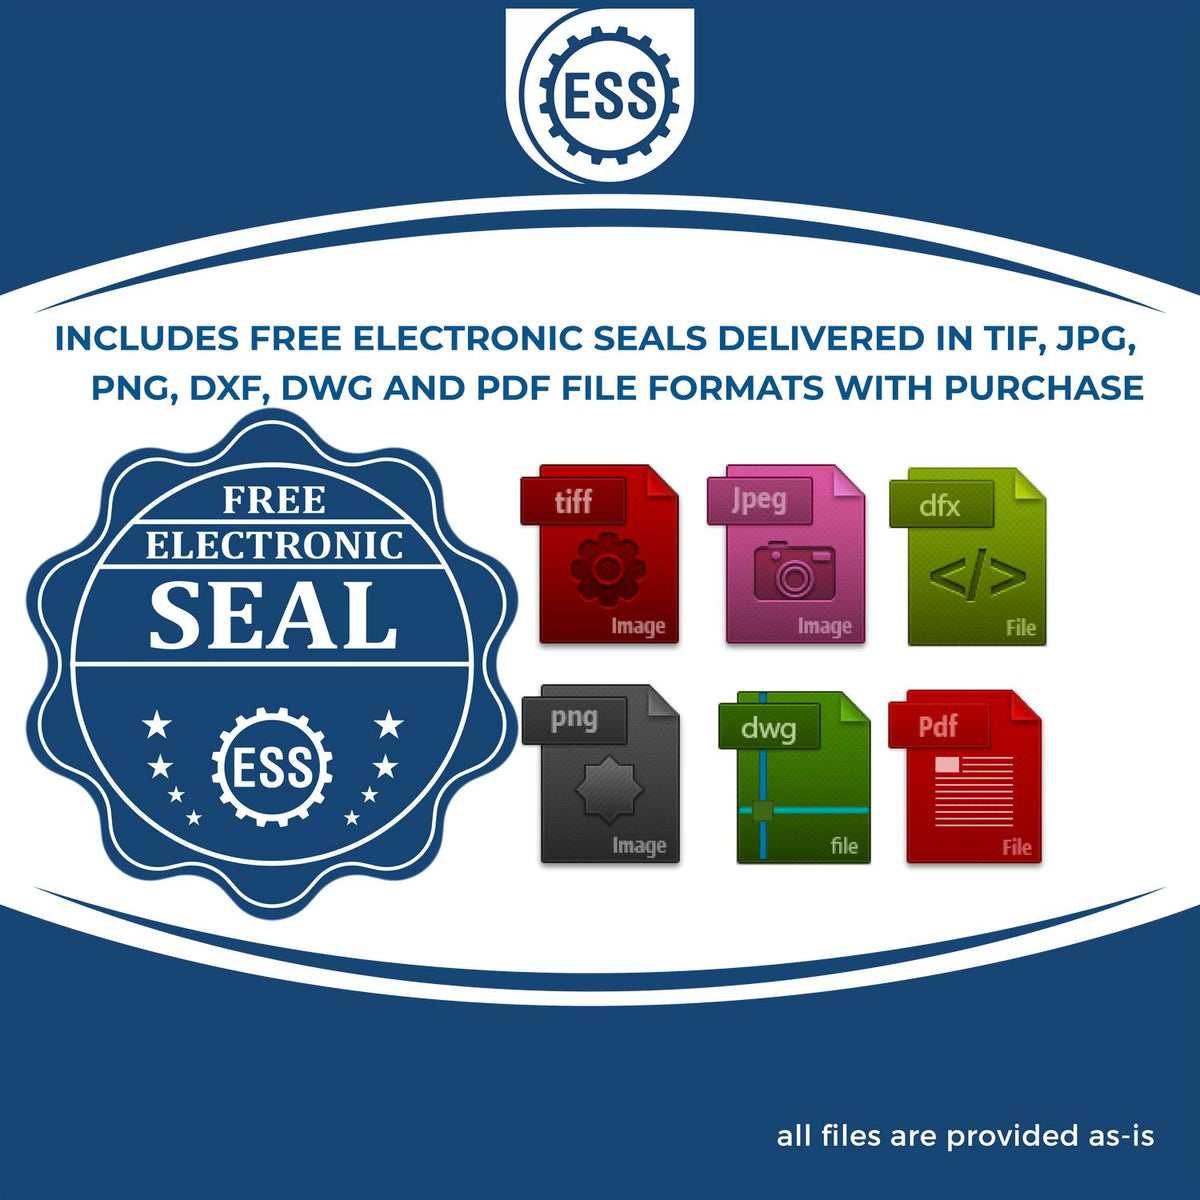 An infographic for the free electronic seal for the Slim Pre-Inked Wyoming Professional Engineer Seal Stamp illustrating the different file type icons such as DXF, DWG, TIF, JPG and PNG.